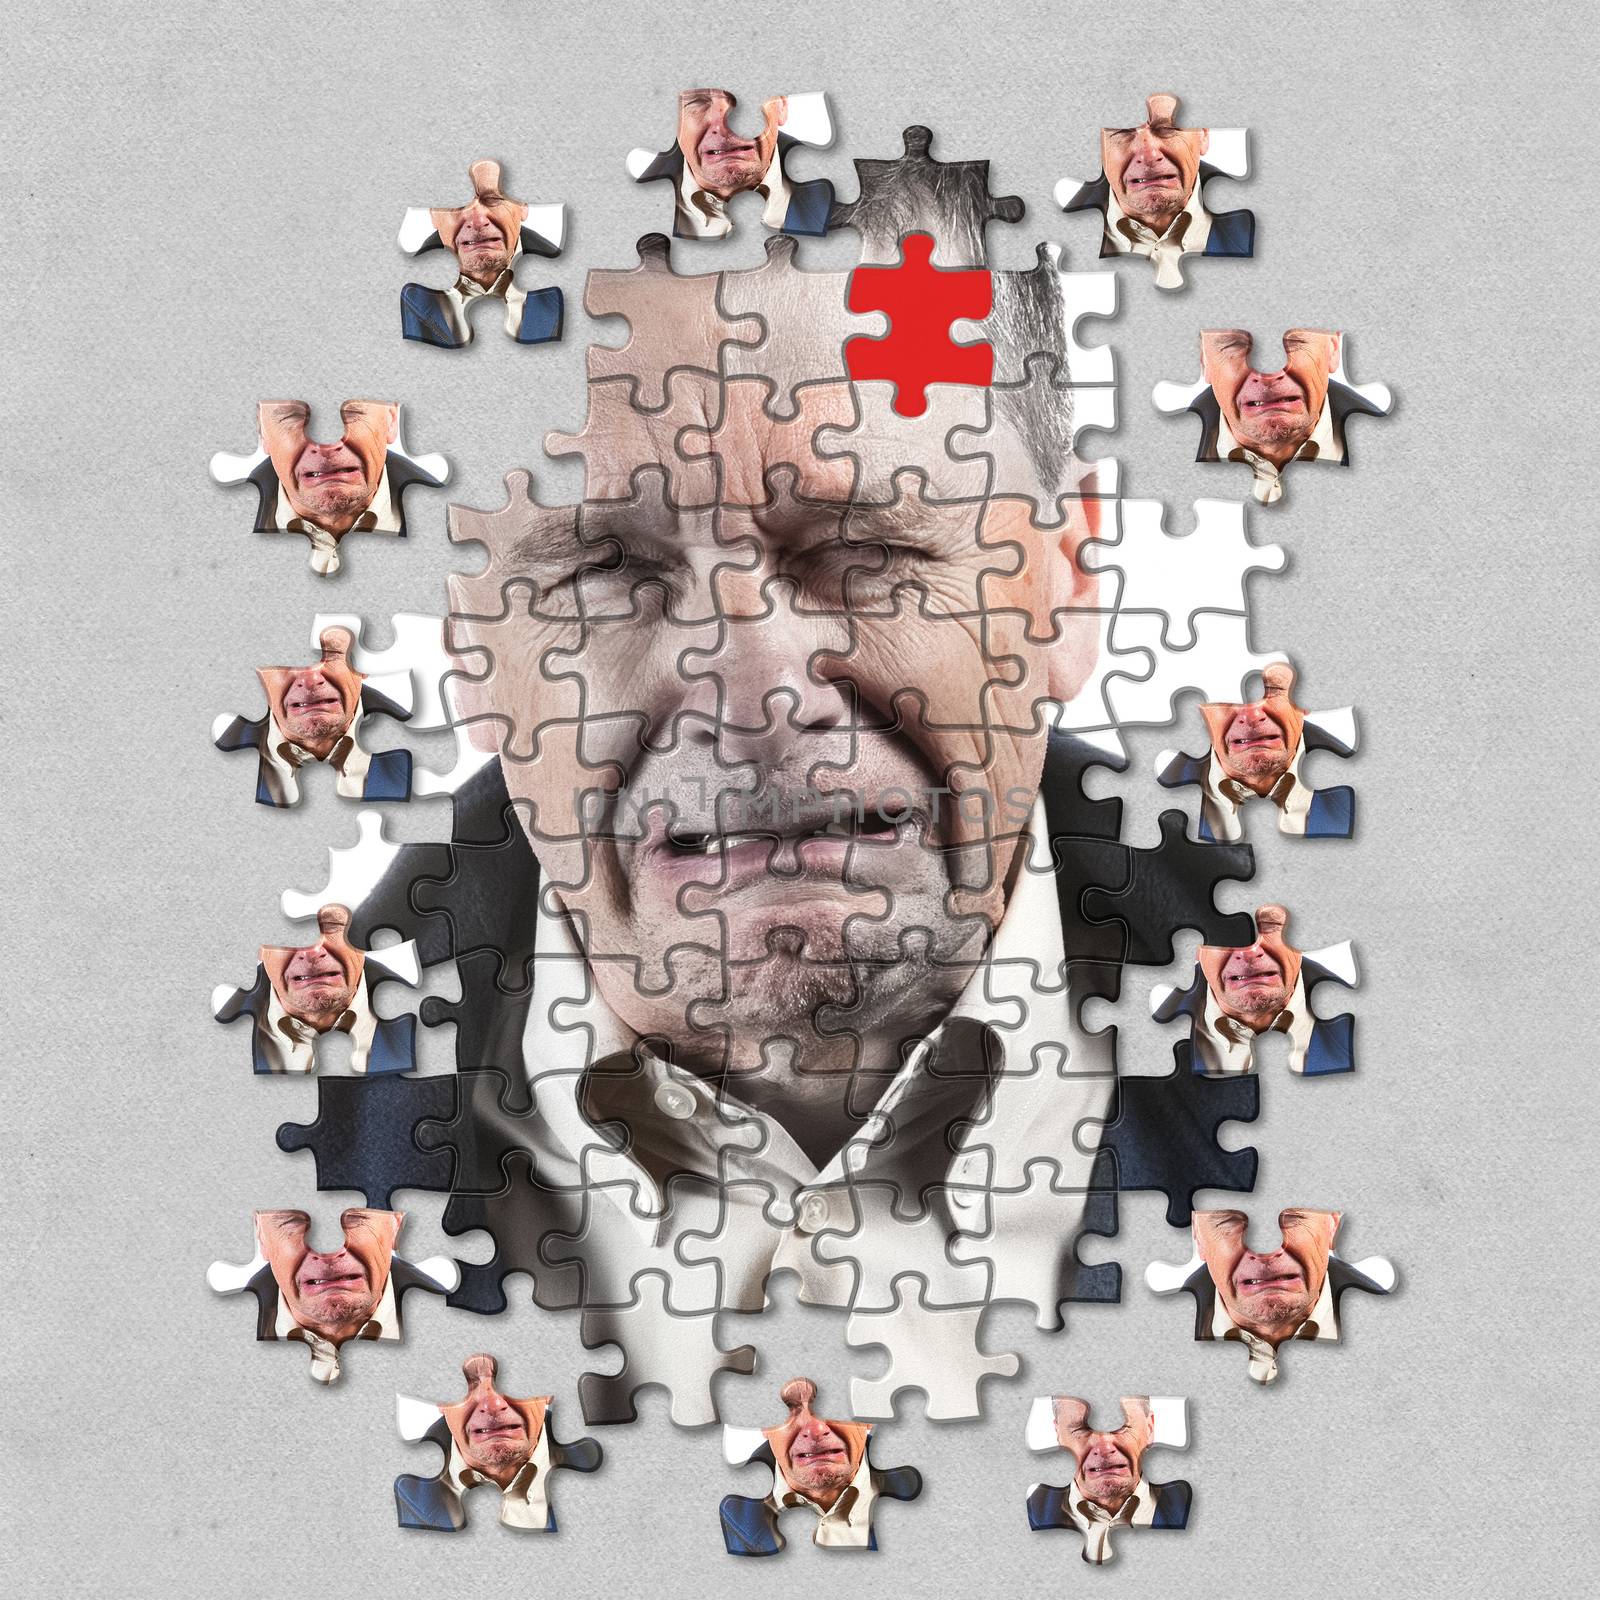 Front view and face of senior caucasian man afraid of mental illness, dementia or Alzheimer's disease using jigsaw concept